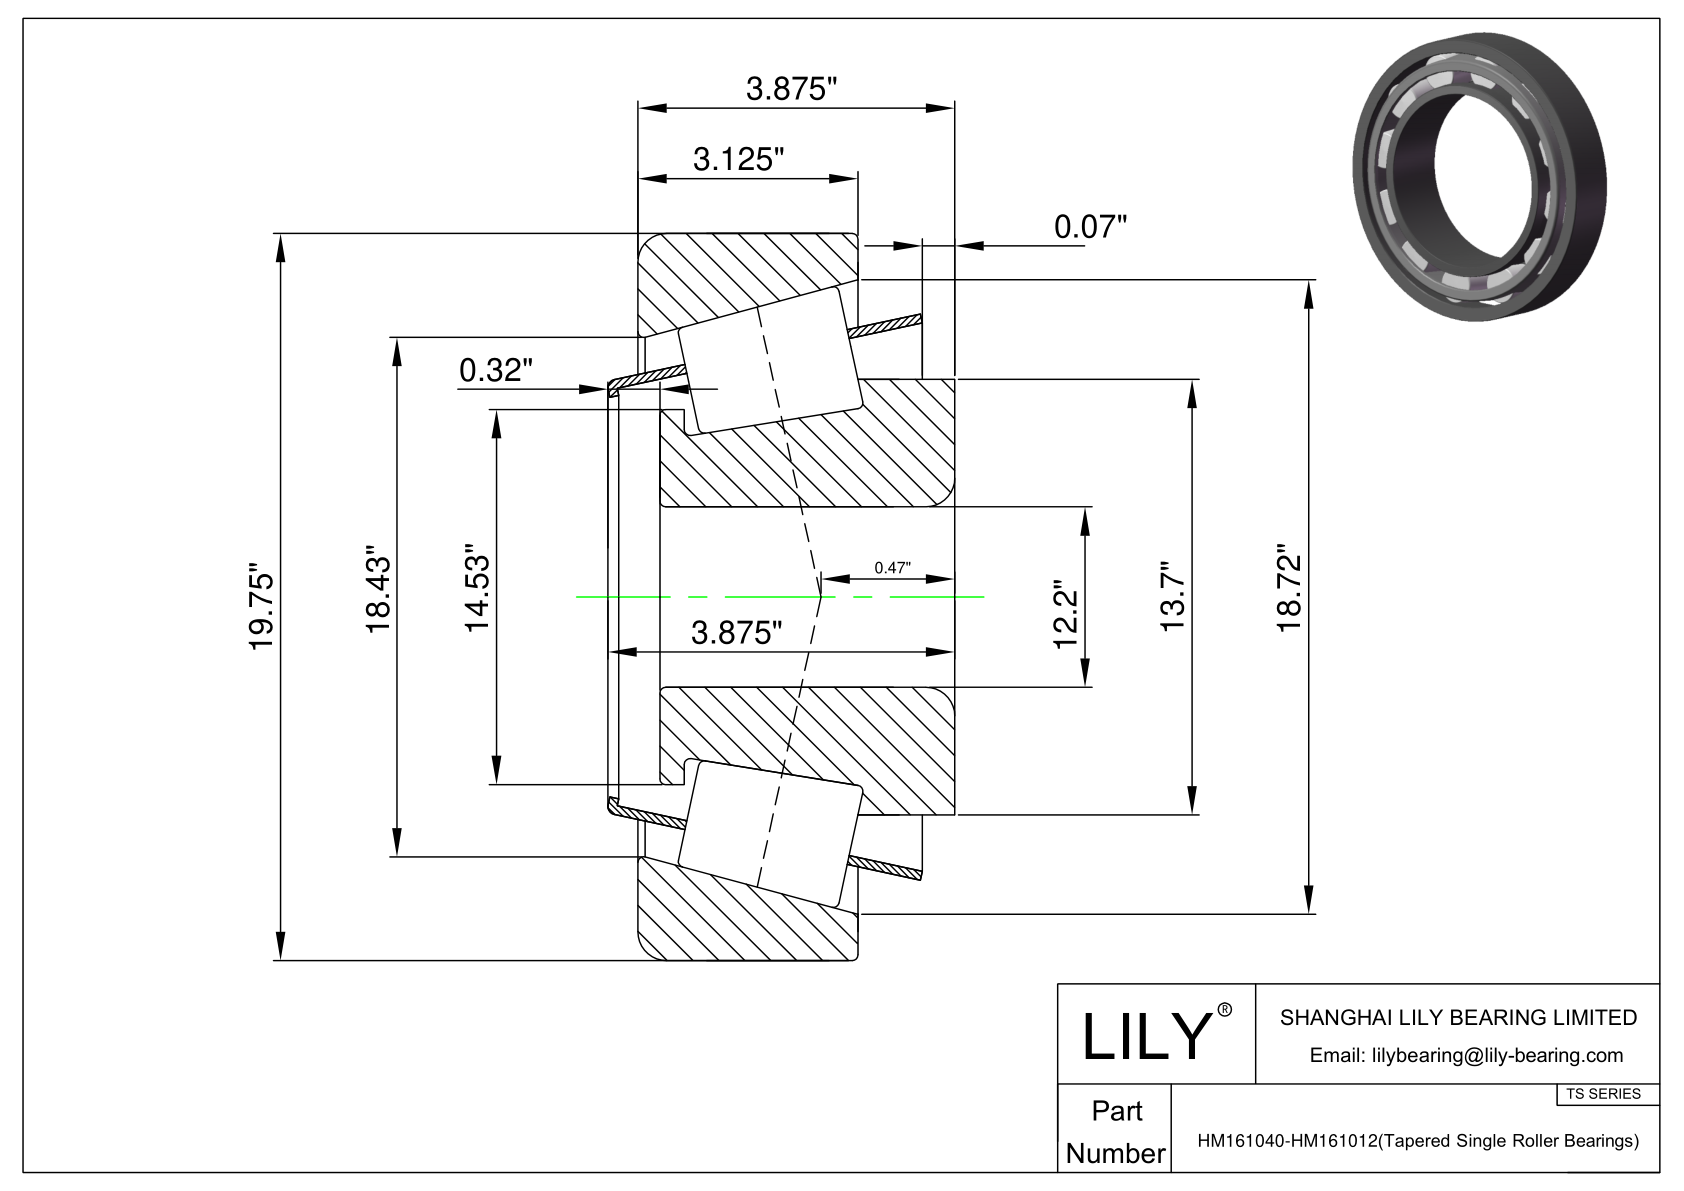 HM161040-HM161012 TS (Tapered Single Roller Bearings) (Imperial) cad drawing